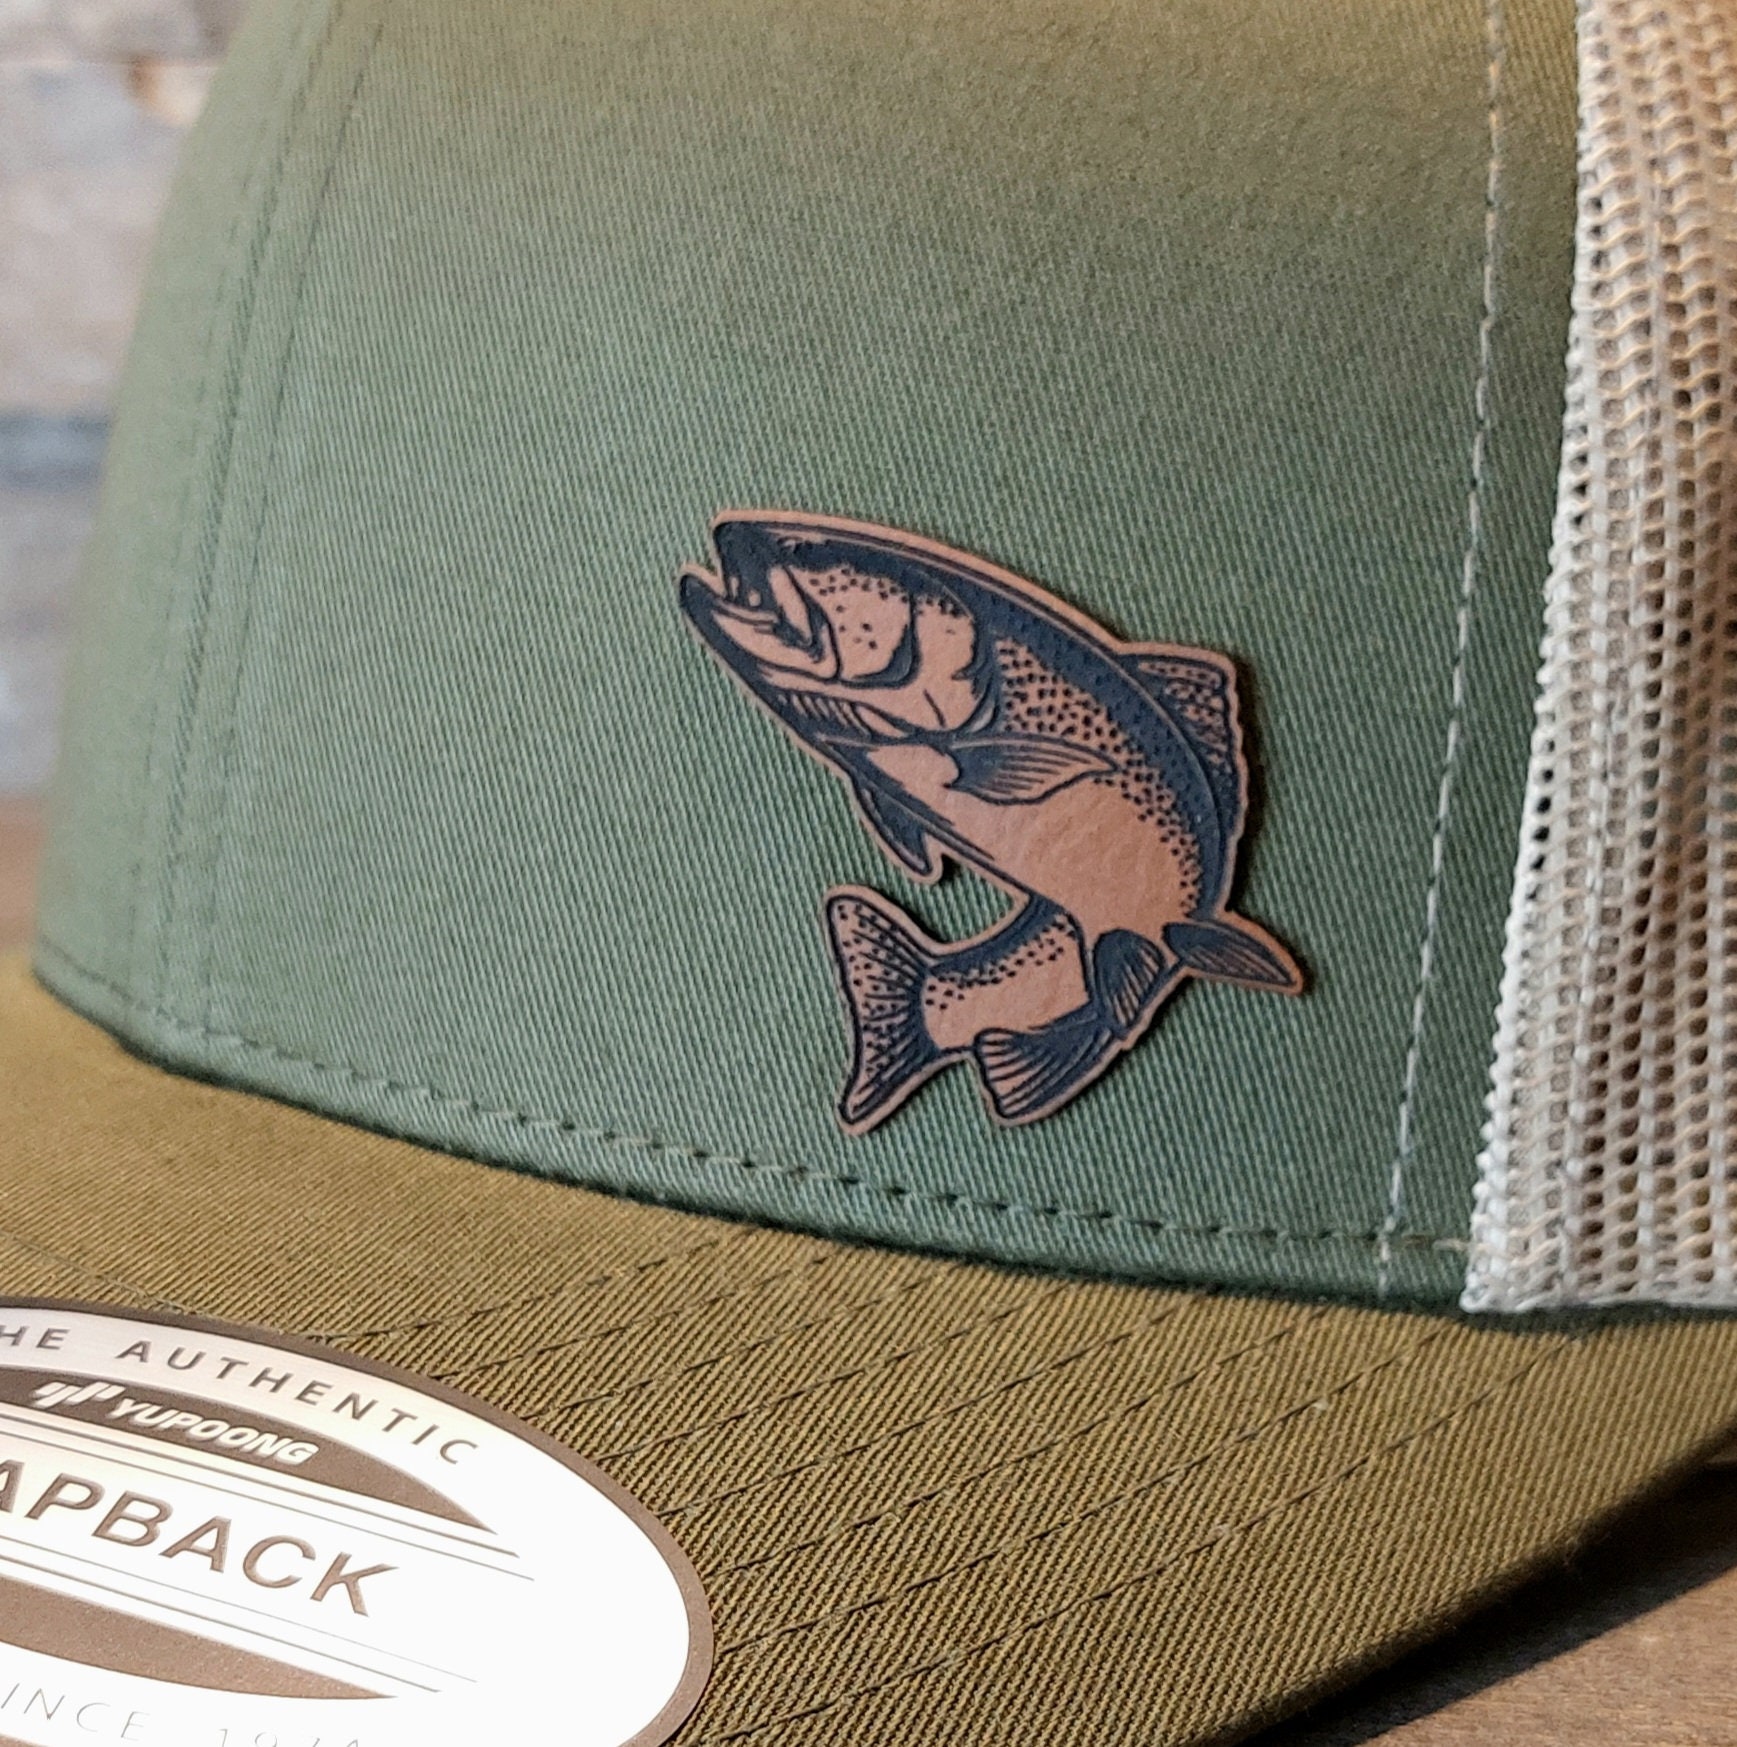 Trout Fishing Hat, Trout Fisherman Gifts, Rainbow Trout Fly Fishing Hat, Fly Fishing Gifts, Fly Fisherman Caps, Trout Patch Fishing Gifts